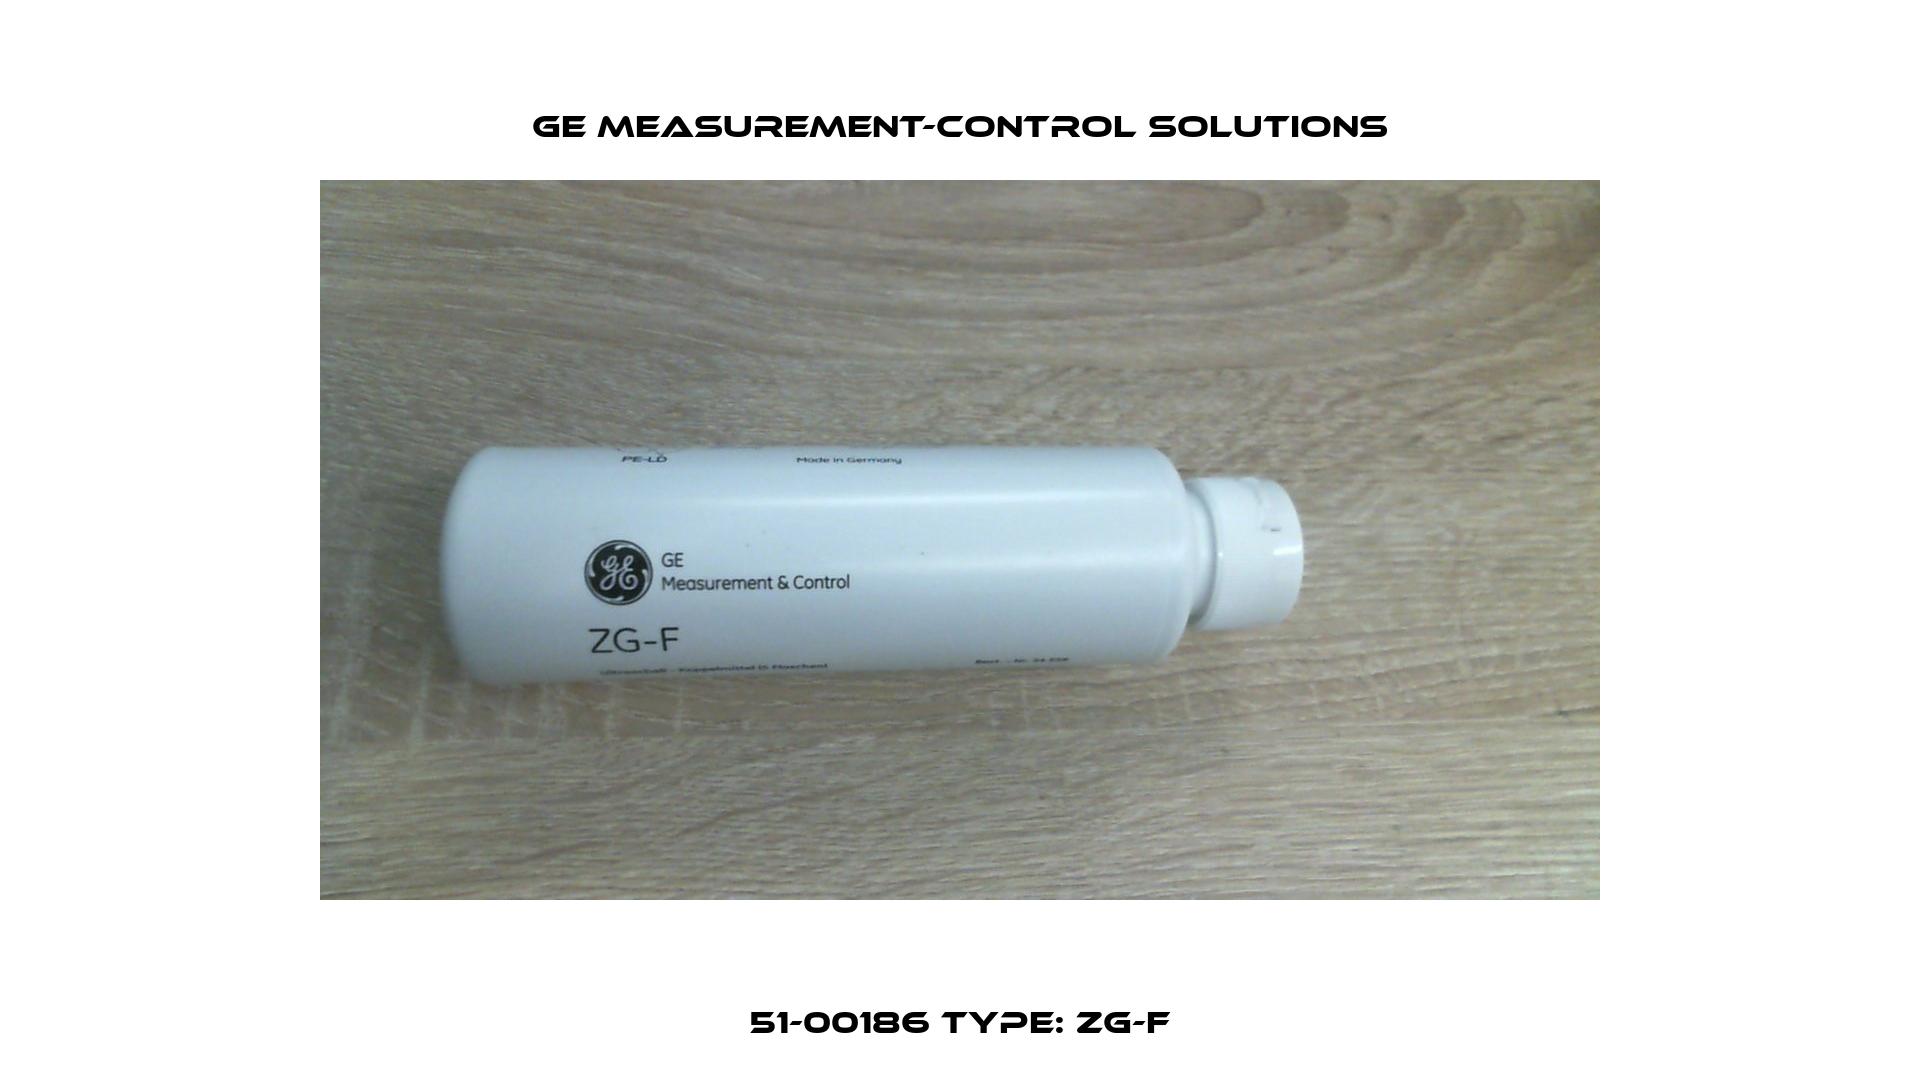 51-00186 Type: ZG-F GE Measurement-Control Solutions